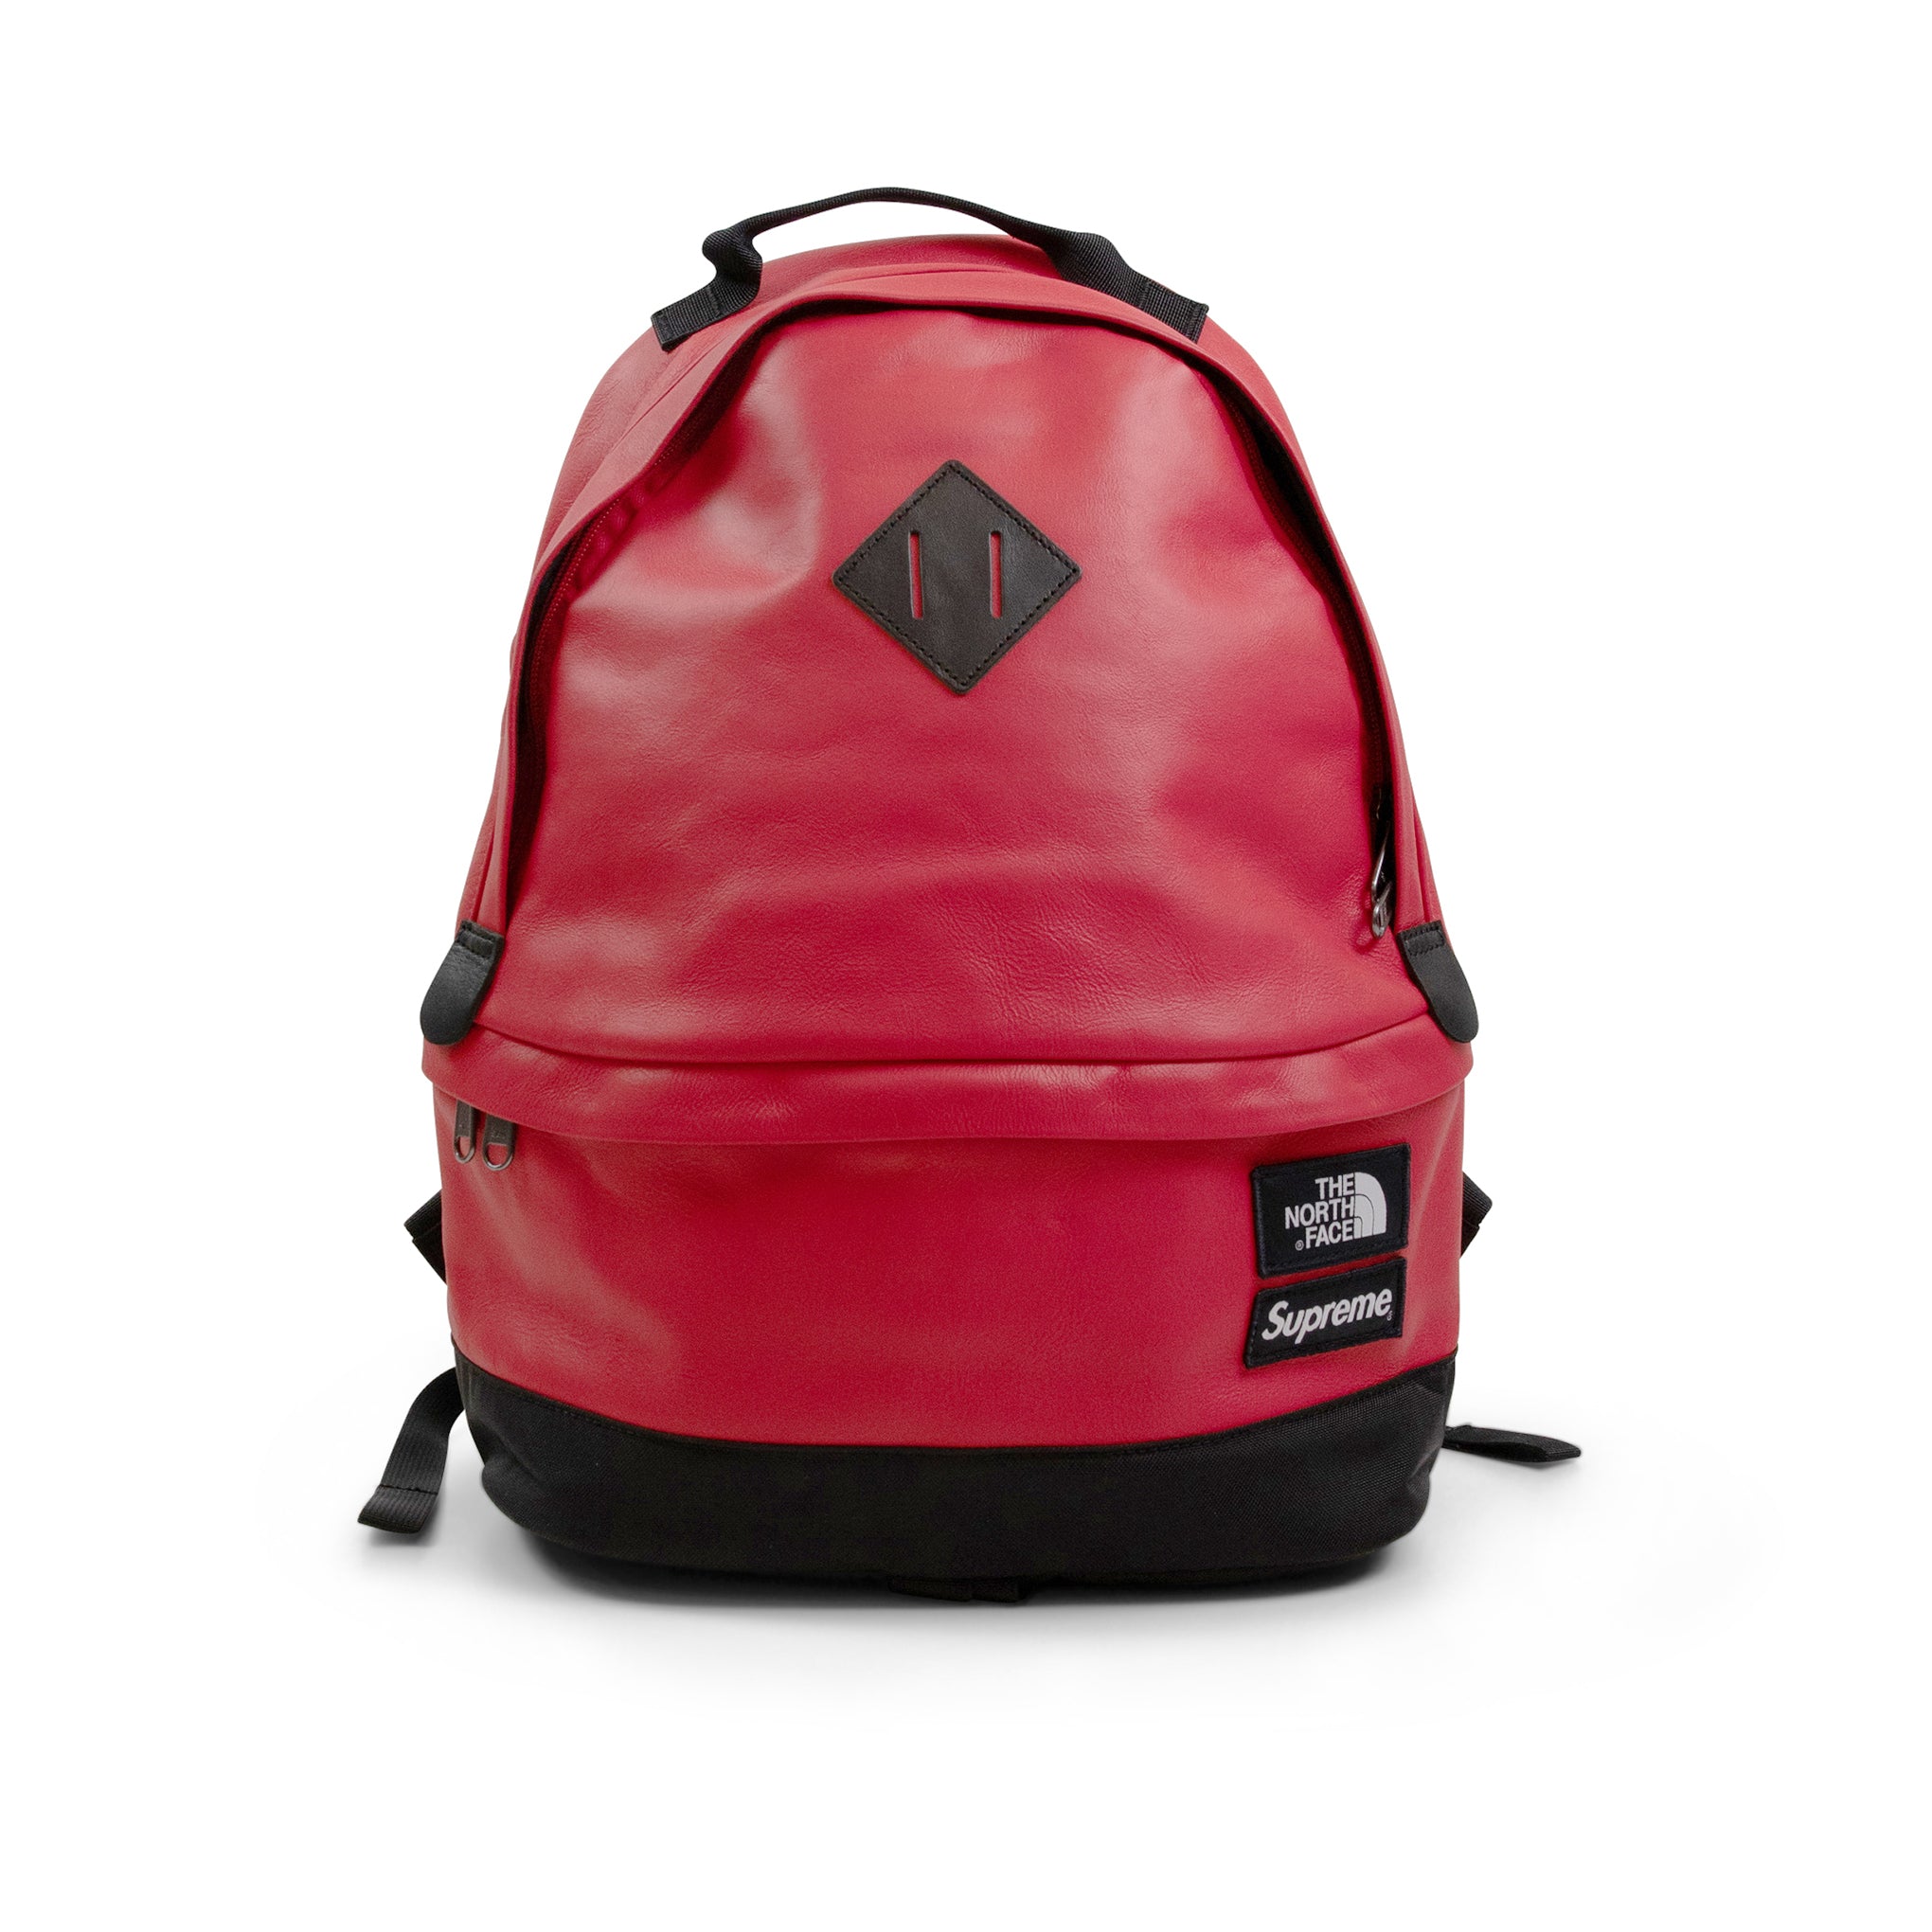 SUPREME THE NORTH FACE LEATHER DAY PACK